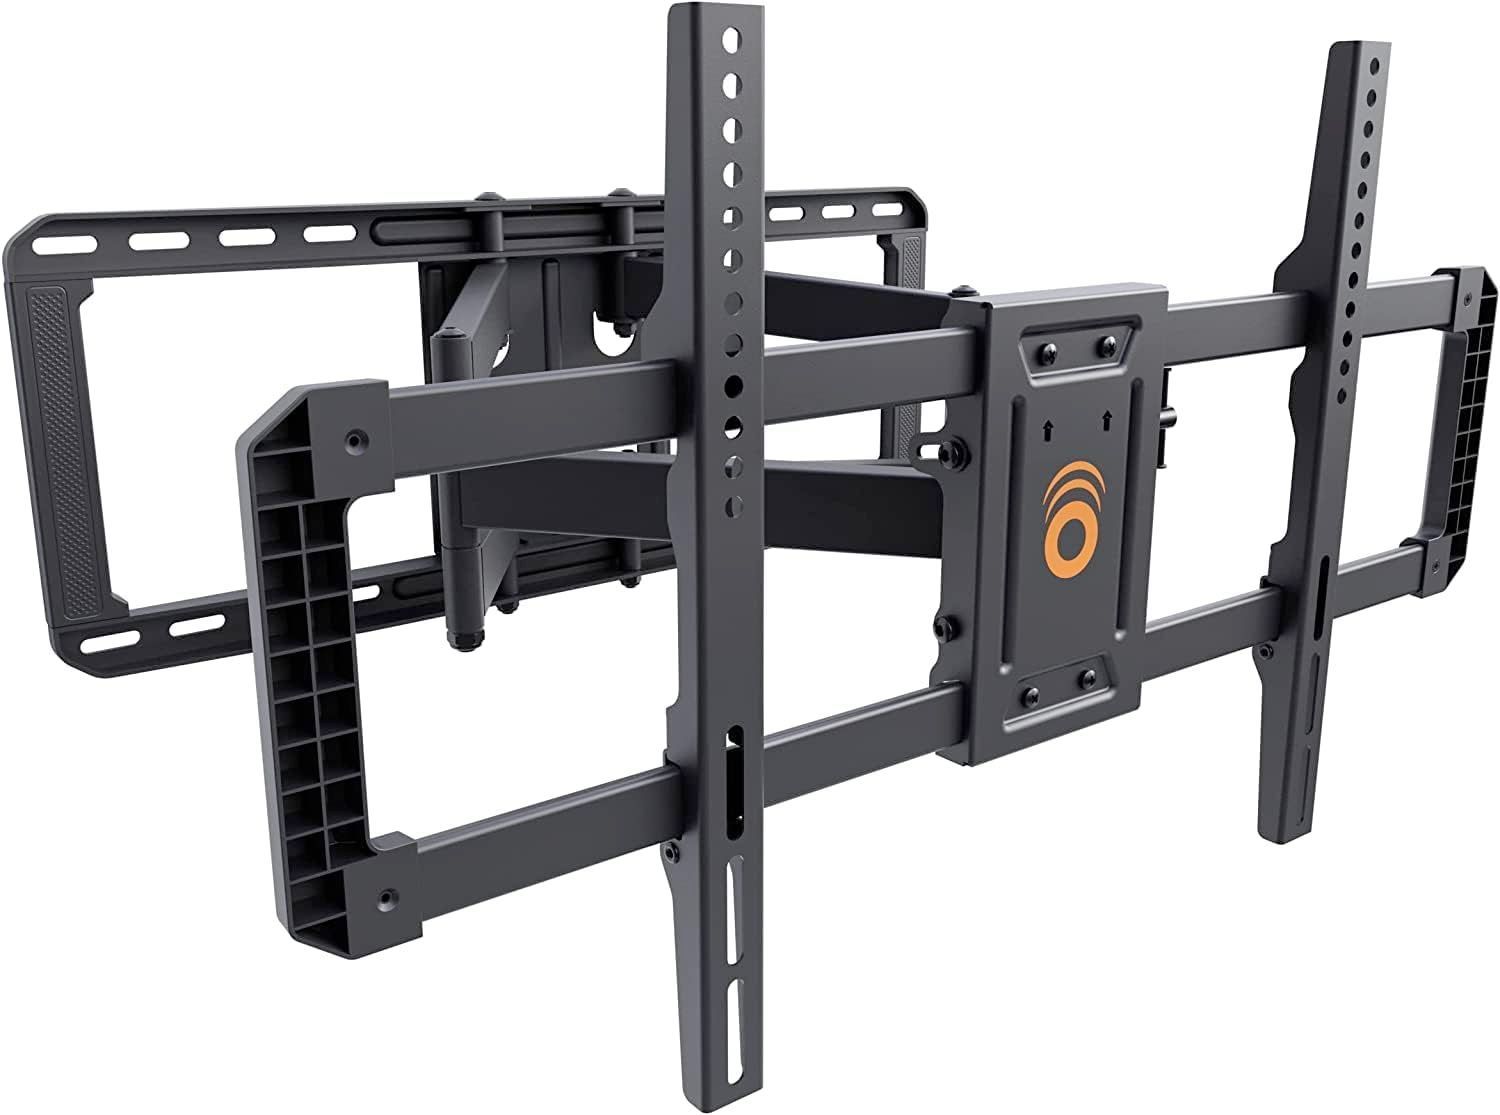 ECHOGEAR MaxMotion TV Wall Mount for Large TVs Up to 90" - Full Motion Has Smooth Swivel, Tilt, & Extension - Universal Design Works with Samsung, Viz